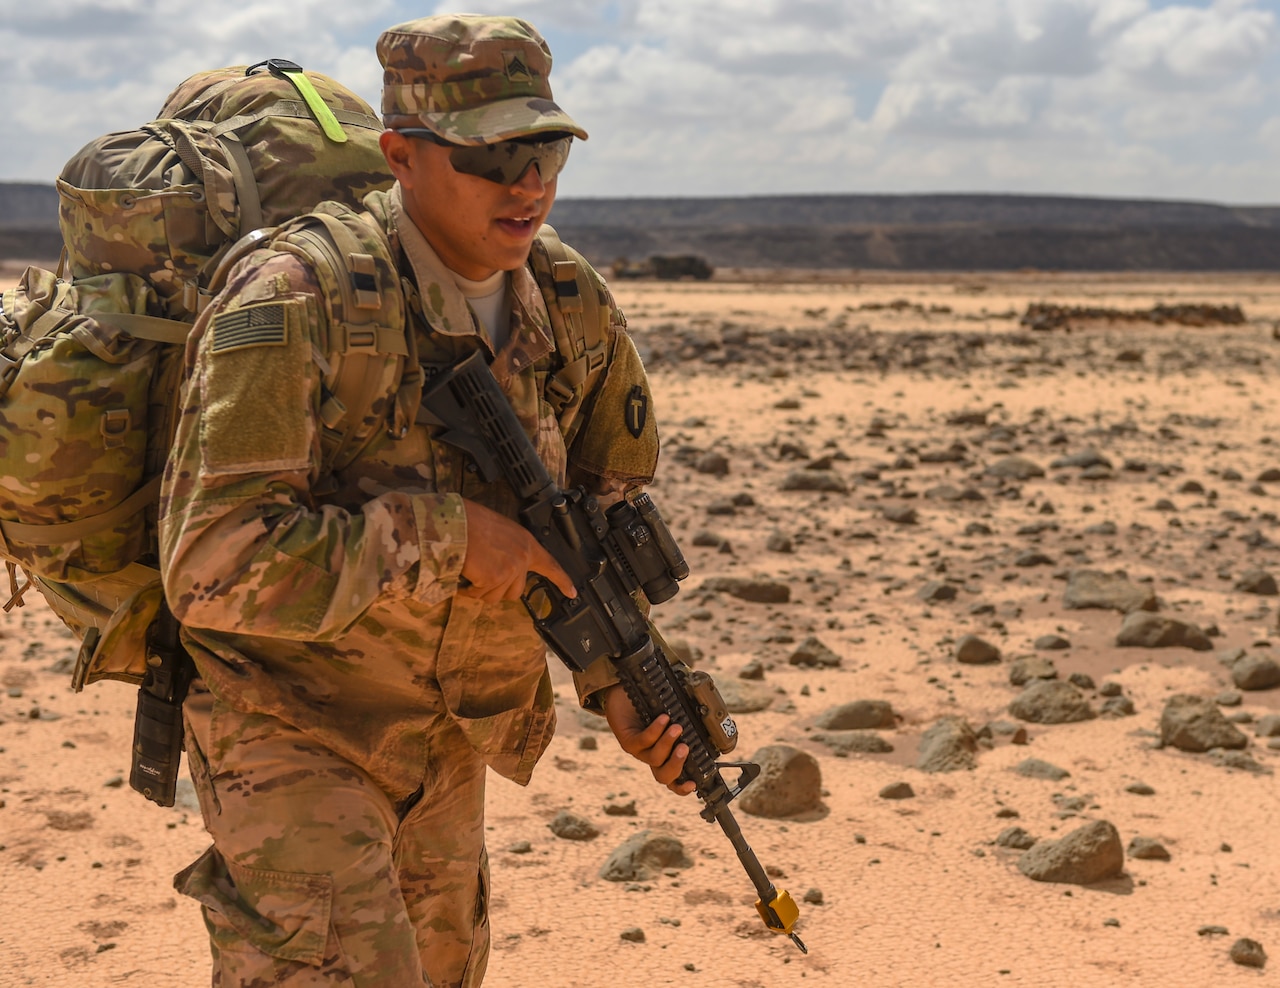 Army Sgt. Gabriel Mancera, with the Texas Army National Guard’s 3rd Battalion, 144th Infantry Regiment, Task Force Bayonet, moves to a defensive position during the first day of a French Desert Commando Course at the Djibouti Range Complex near Arta, Djibouti.